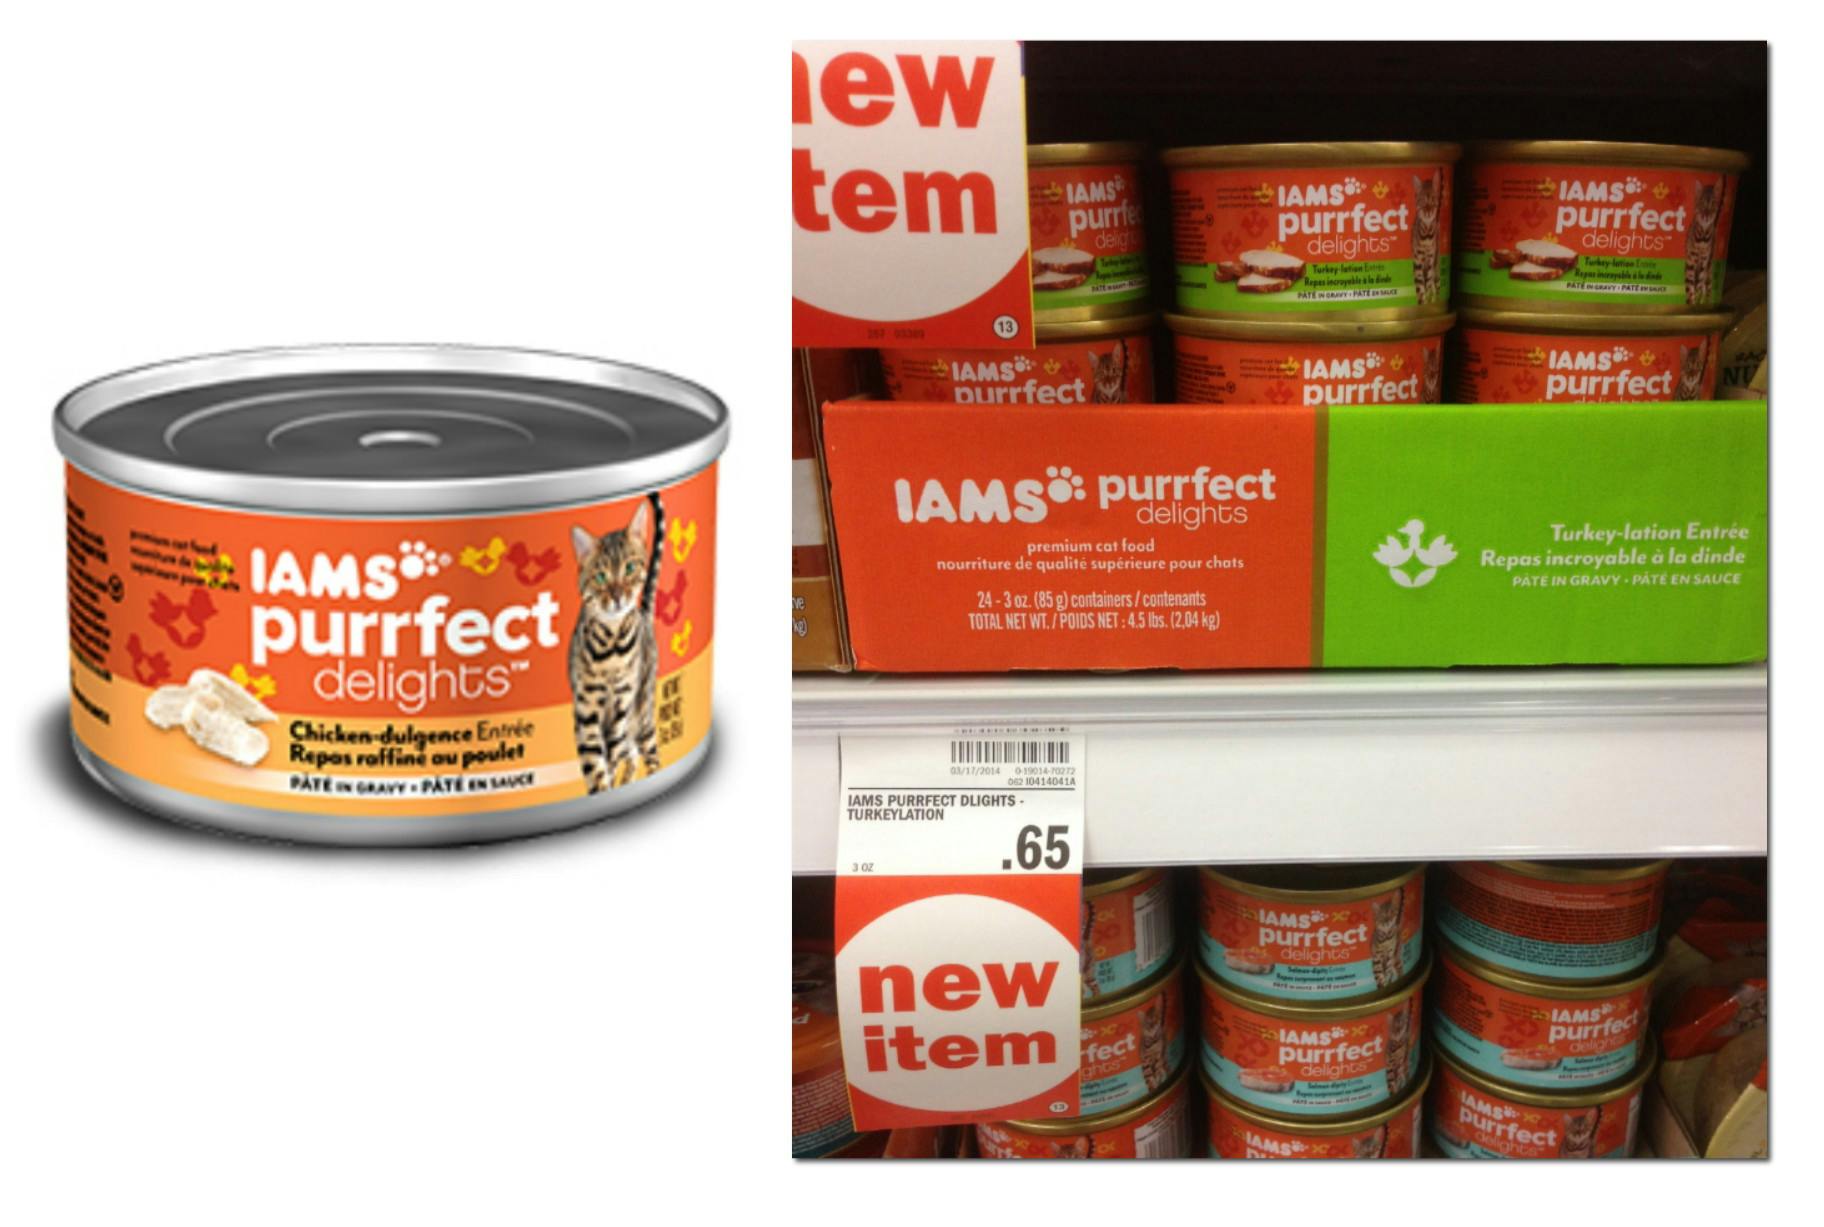 Free Iams Cat Food at Meijer! - The Krazy Coupon Lady